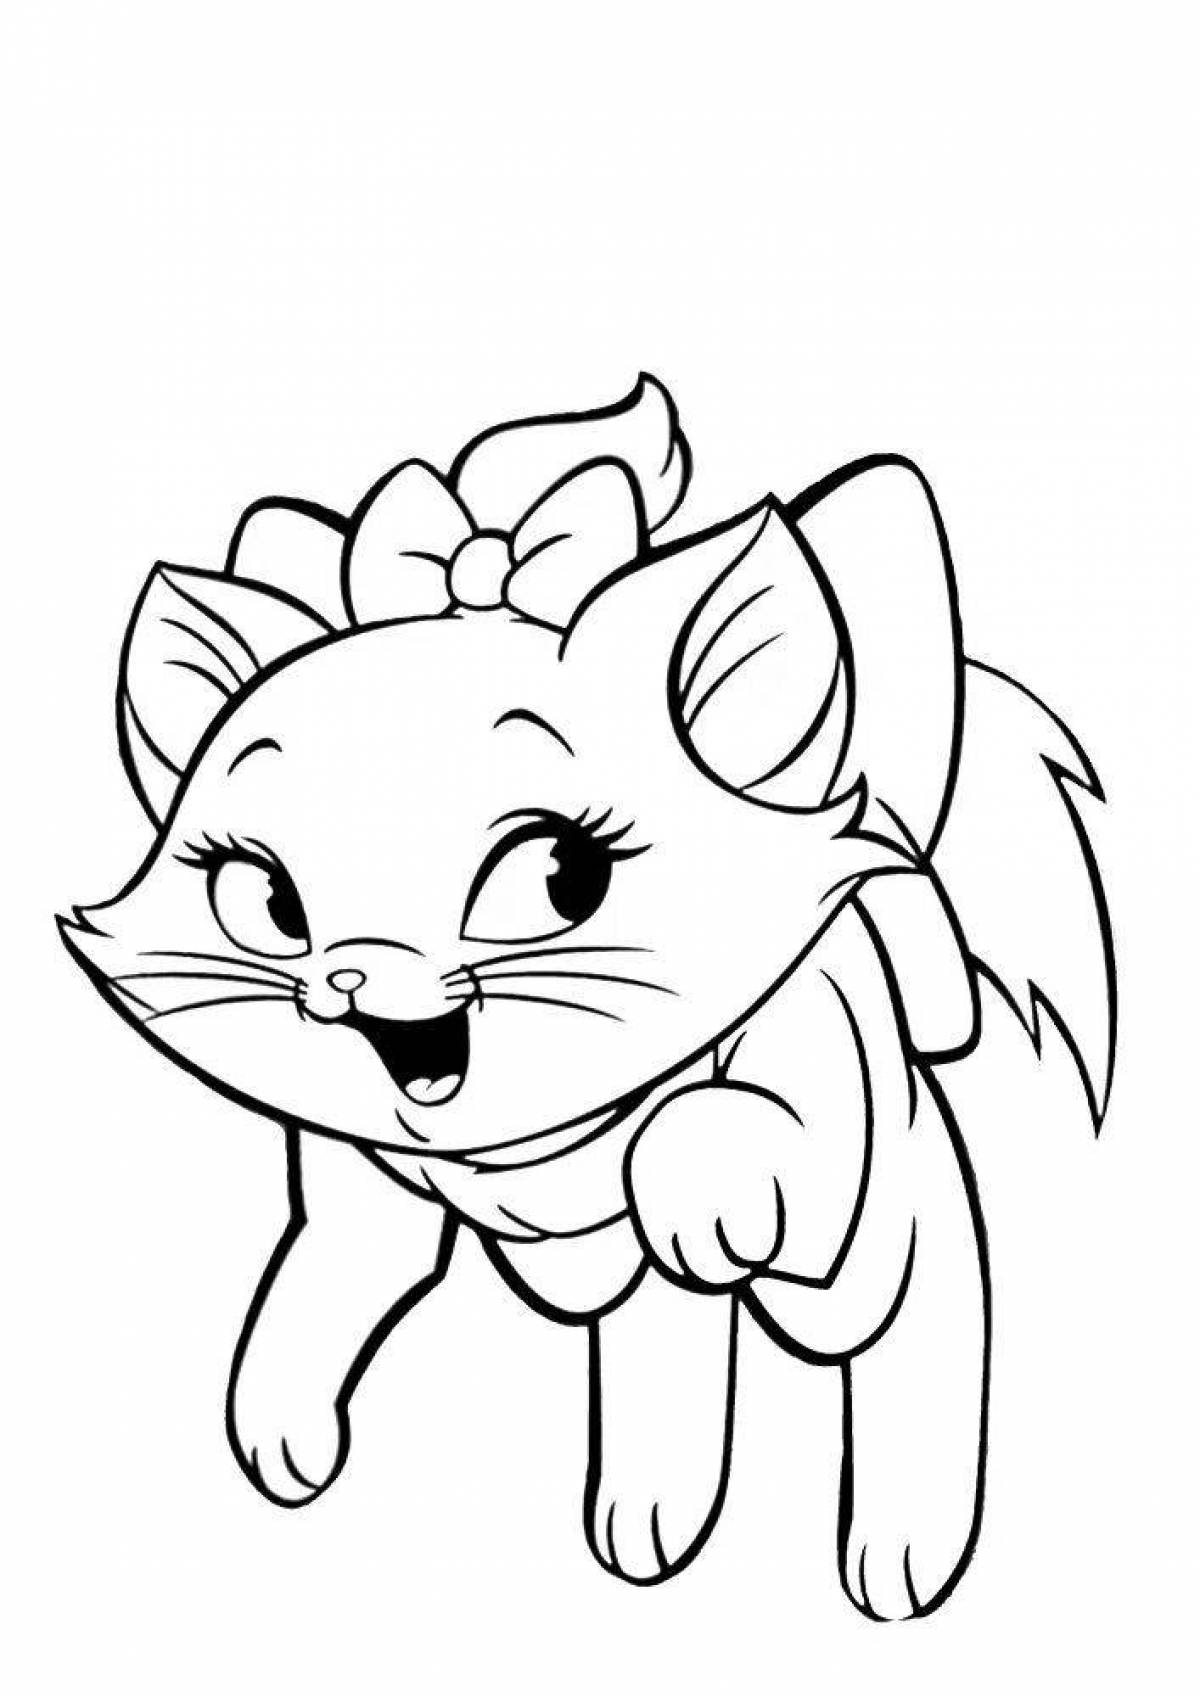 Awesome marie kitty coloring page